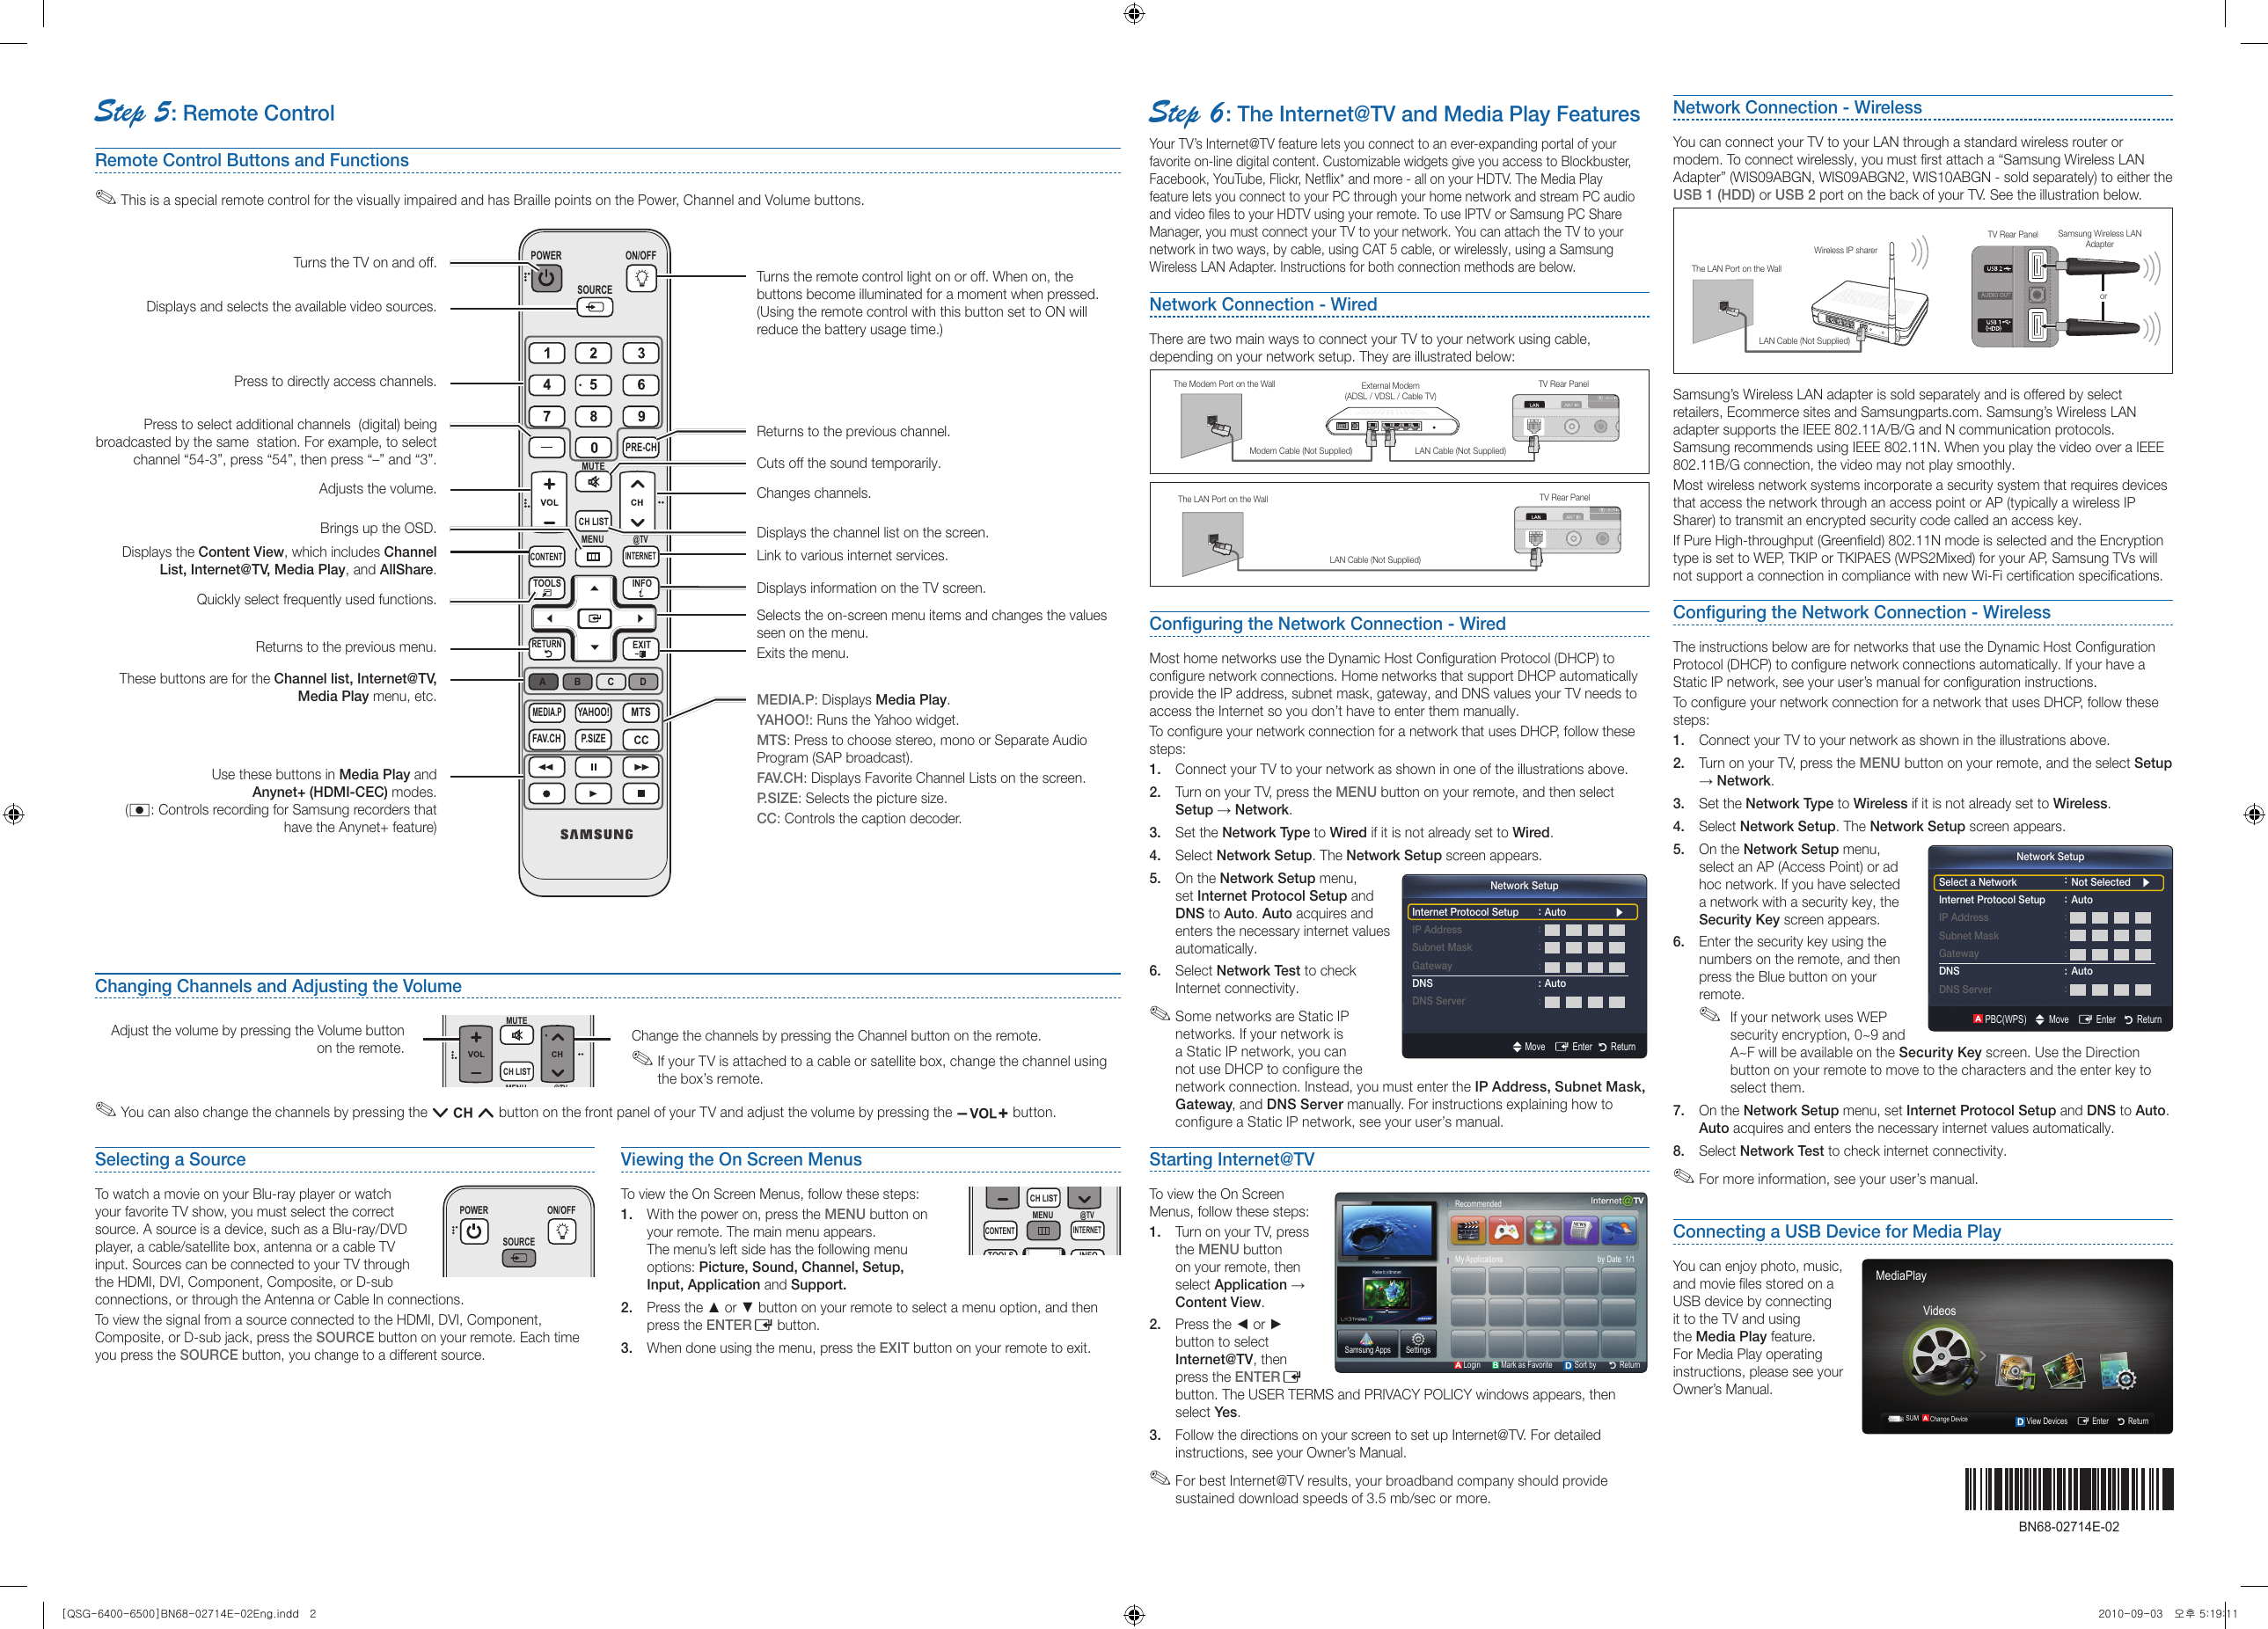 Page 2 of 2 - Samsung Samsung-Bn68-02714E-02-Users-Manual-  Samsung-bn68-02714e-02-users-manual